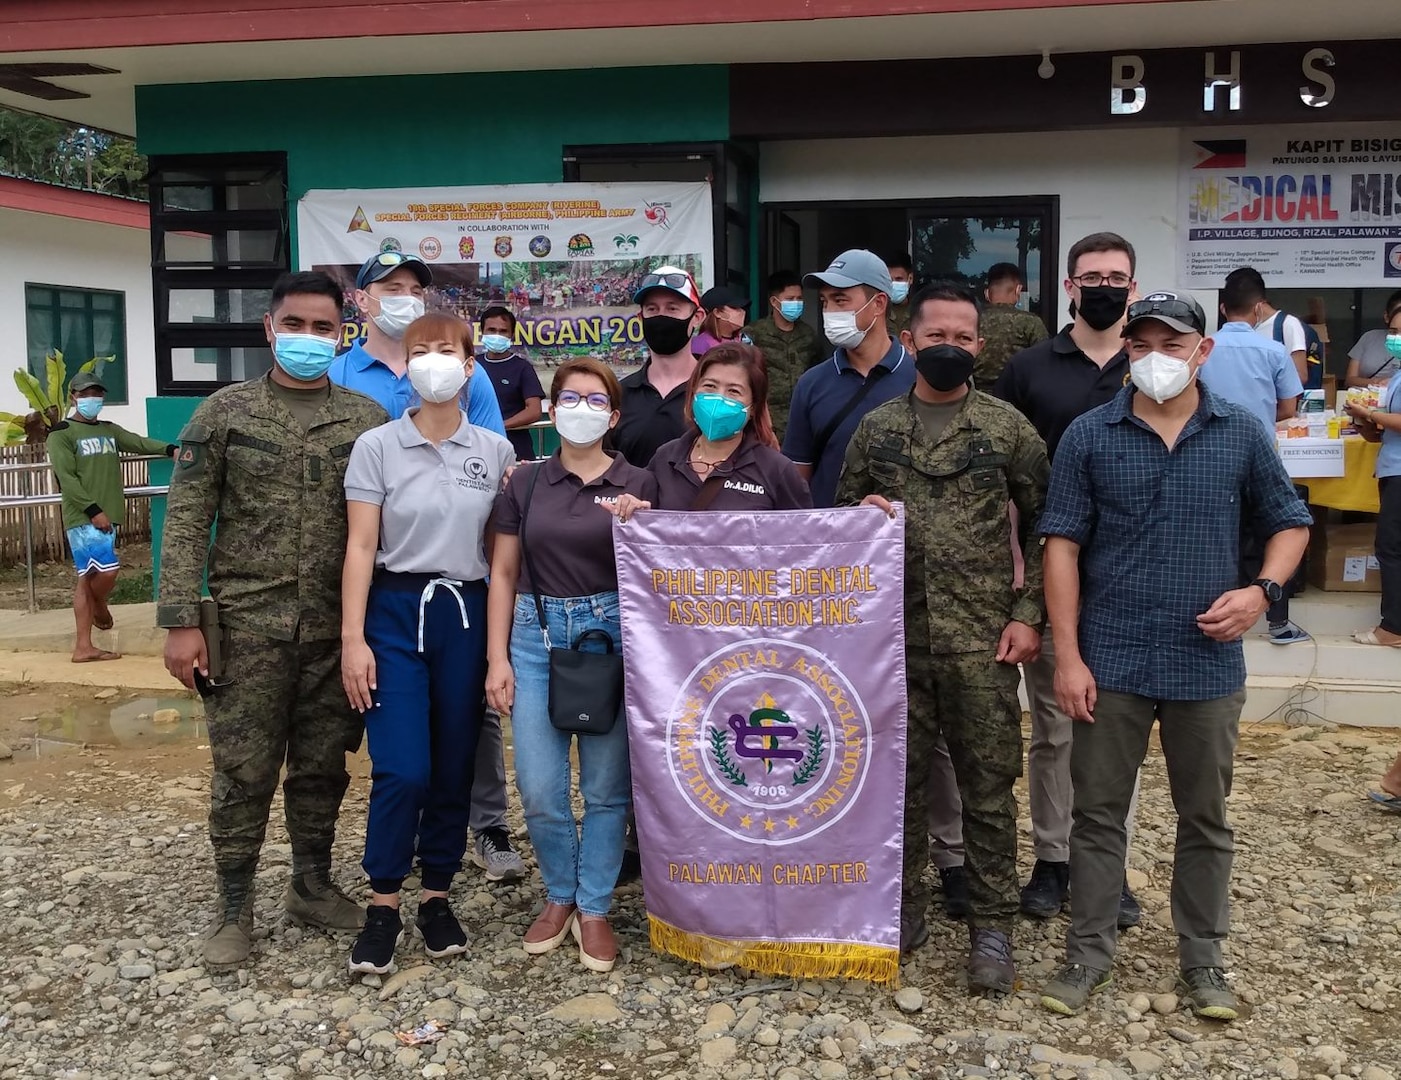 U.S. Military Supports Medical, Dental Outreach in Palawan Indigenous Communities